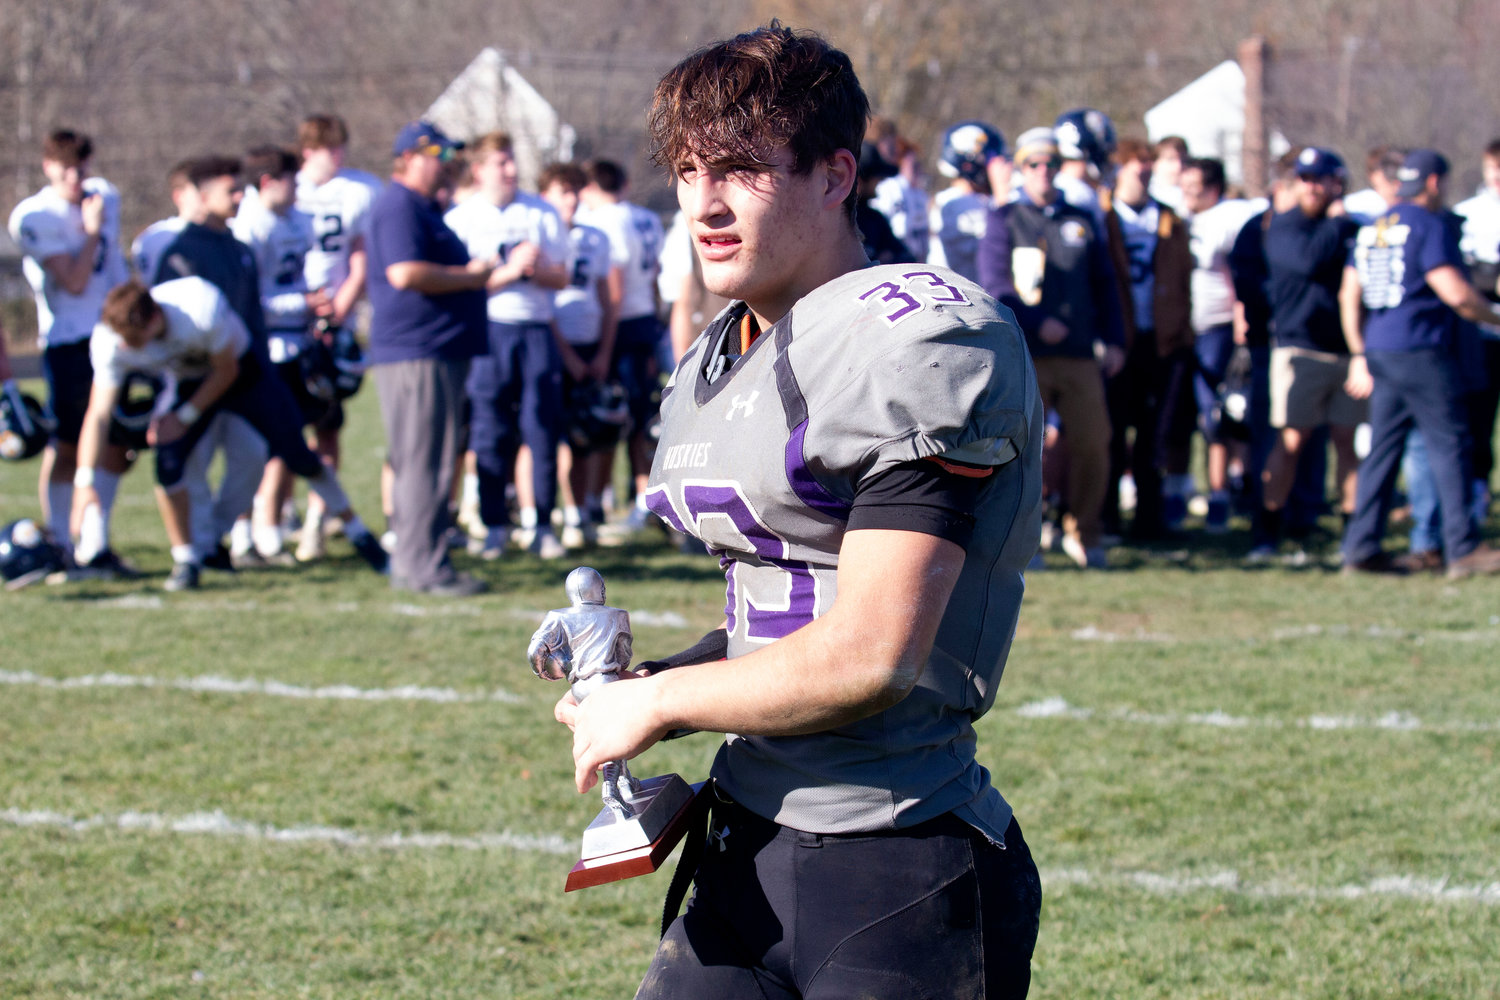 Brock Pacheco holds the Thanksgiving Day game MVP award. The senior won a host of accolades including the Silver Dozen award and the Providence Gridiron Club’s Offensive MVP. During the fall football season Pacheco shattered both the single season rushing record and touchdown record.